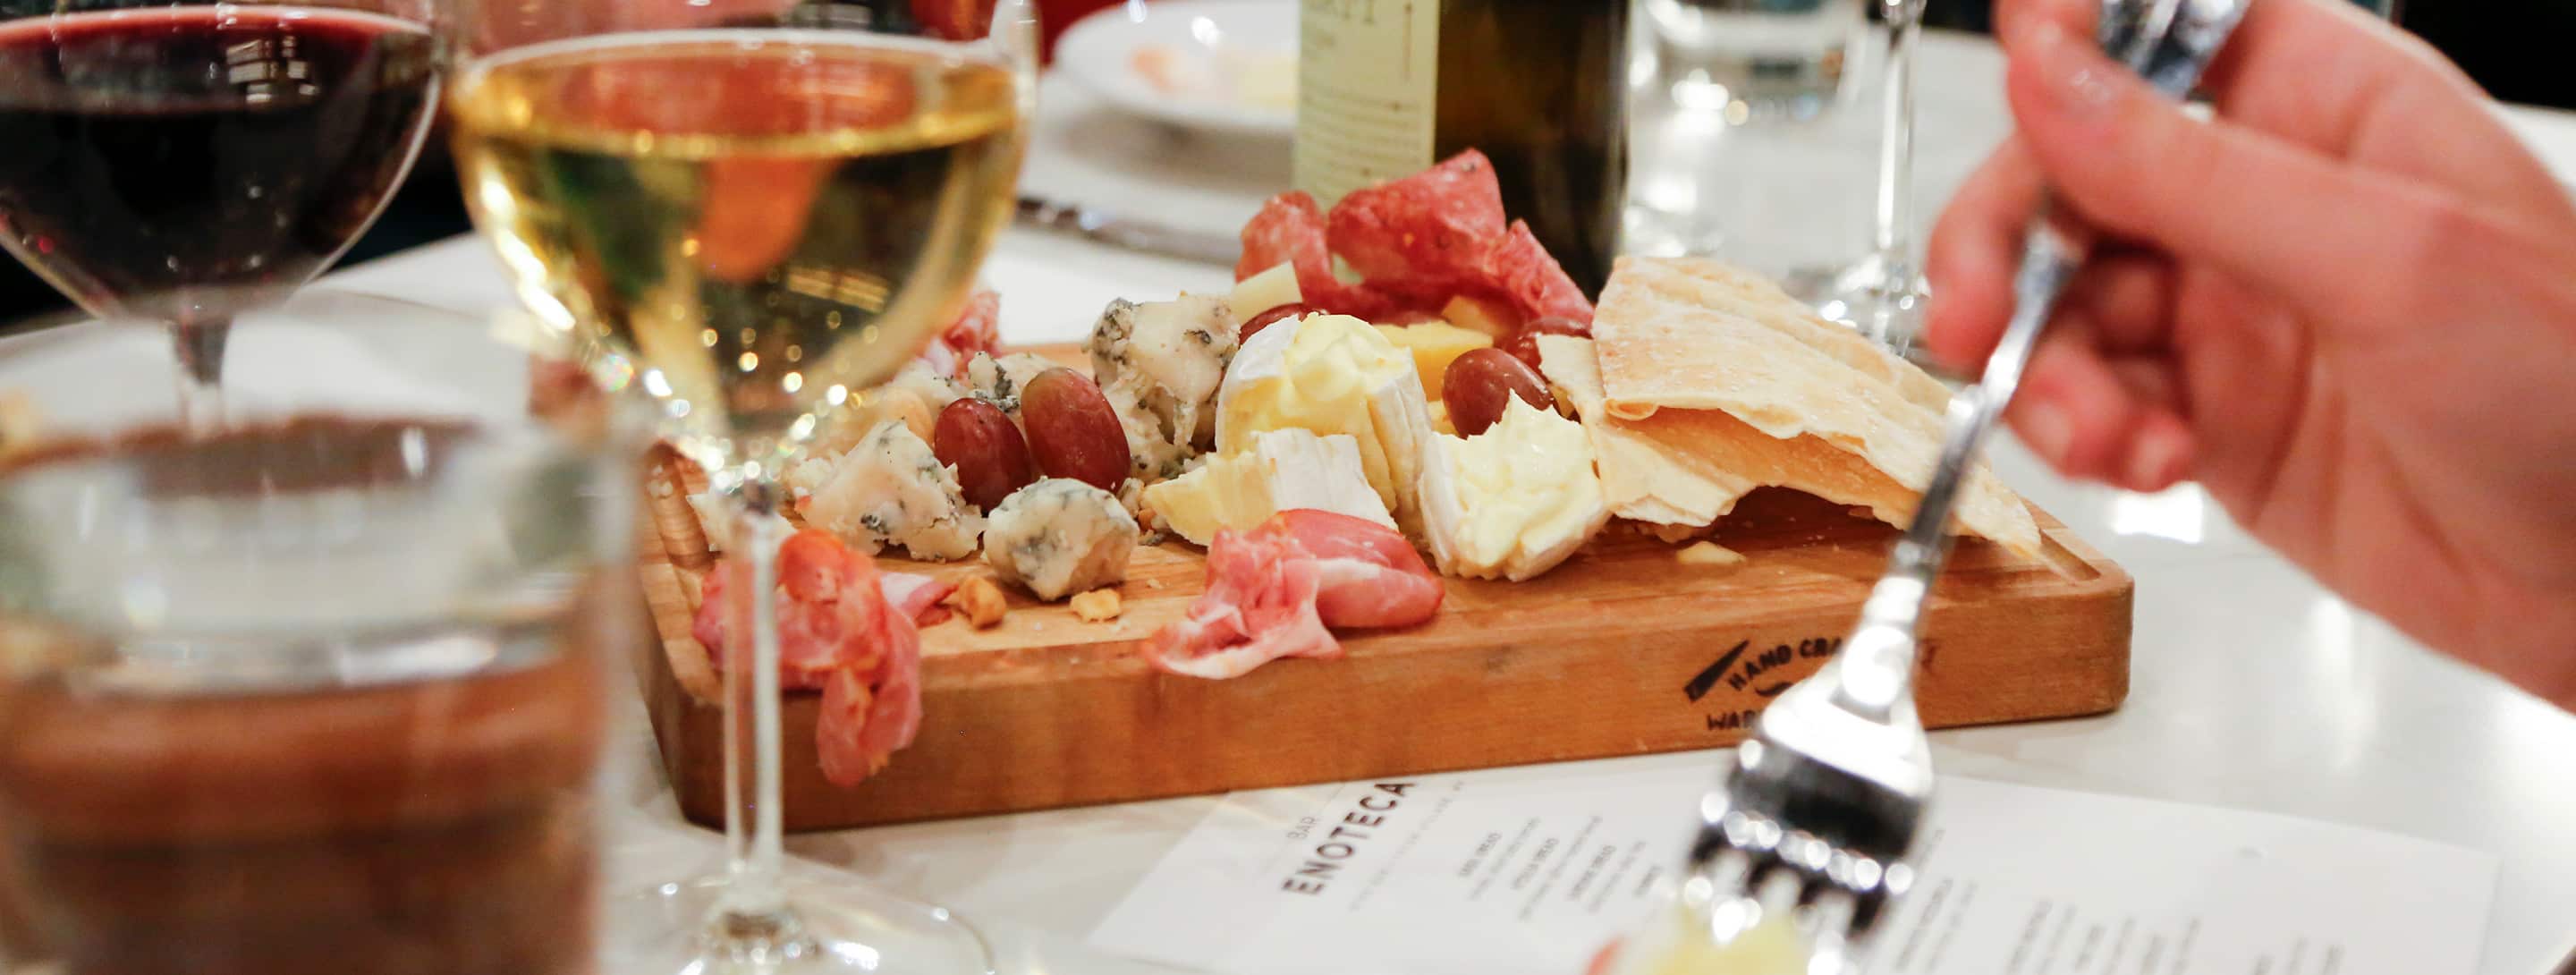 Charcuterie board with various meats and cheeses on a table with wine glasses at Bar Enoteca in Jackson, Wyoming.